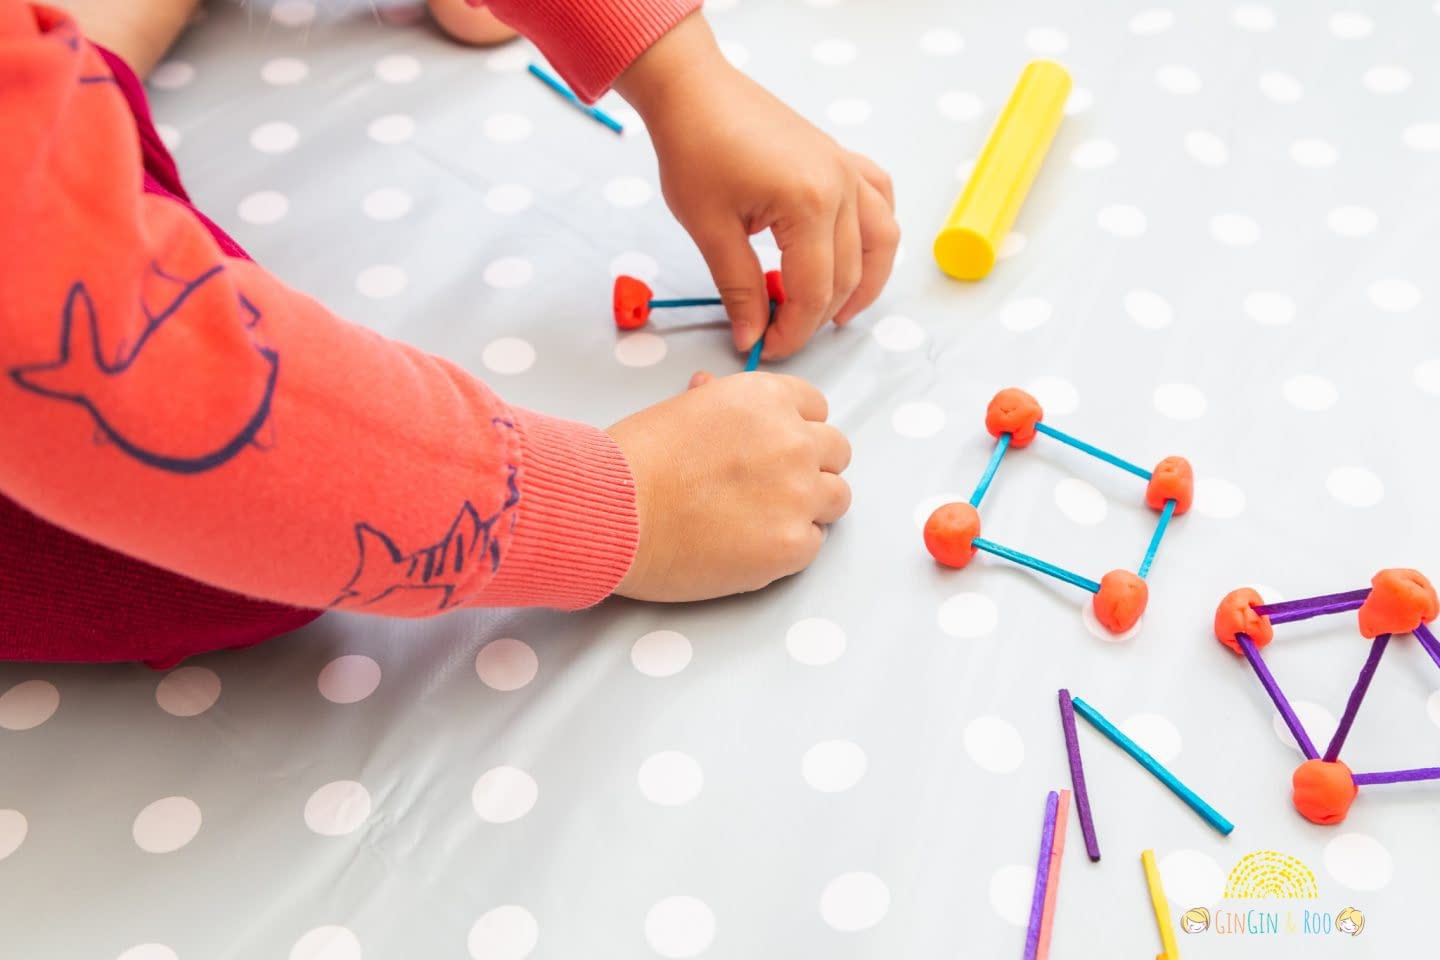 Making Matchstick Shapes. A fun maths activity from GinGin & Roo
#toddleractivity #toddlerlearn #toddlereducation